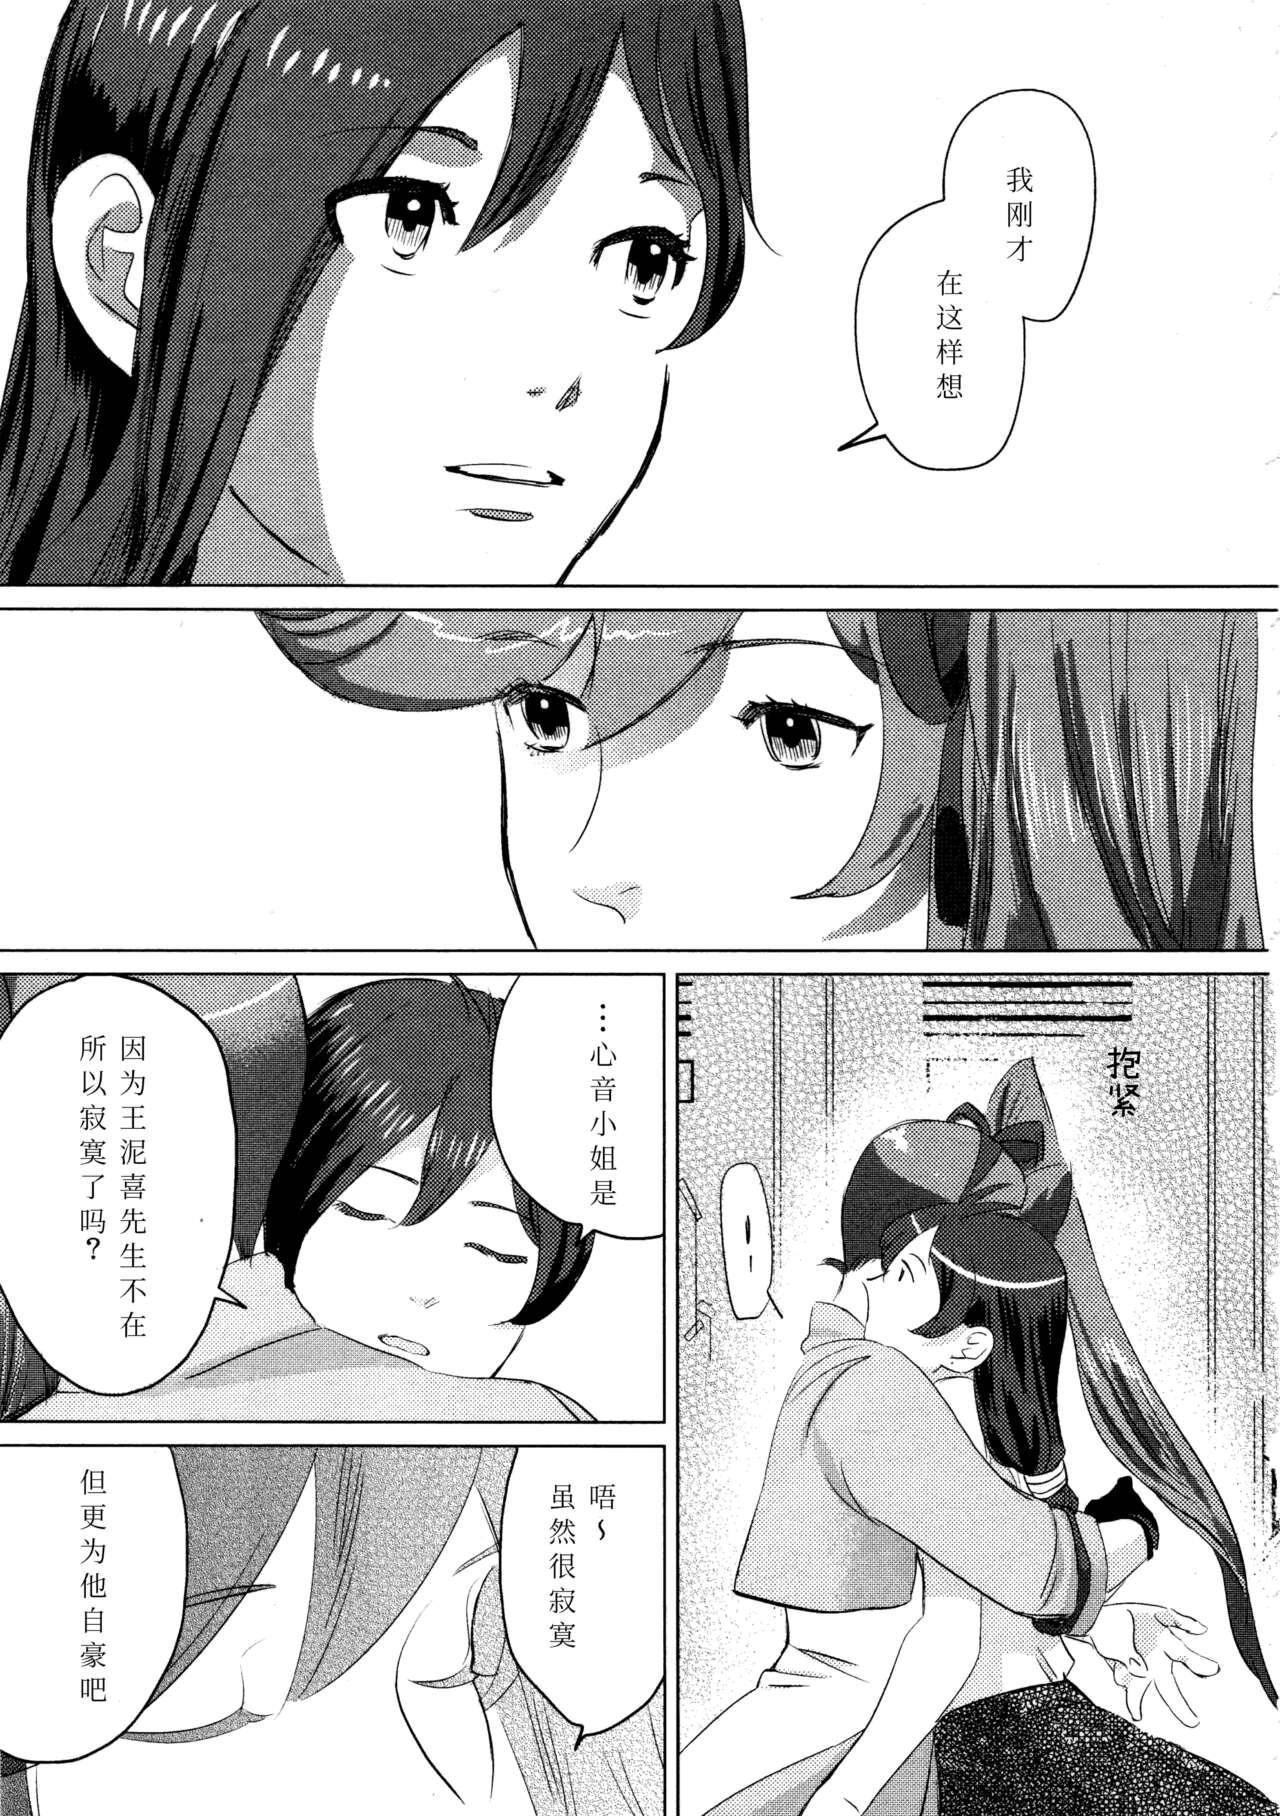 Mmf Don't leave me alone,my big LITTLE brother - Ace attorney | gyakuten saiban Coed - Page 6